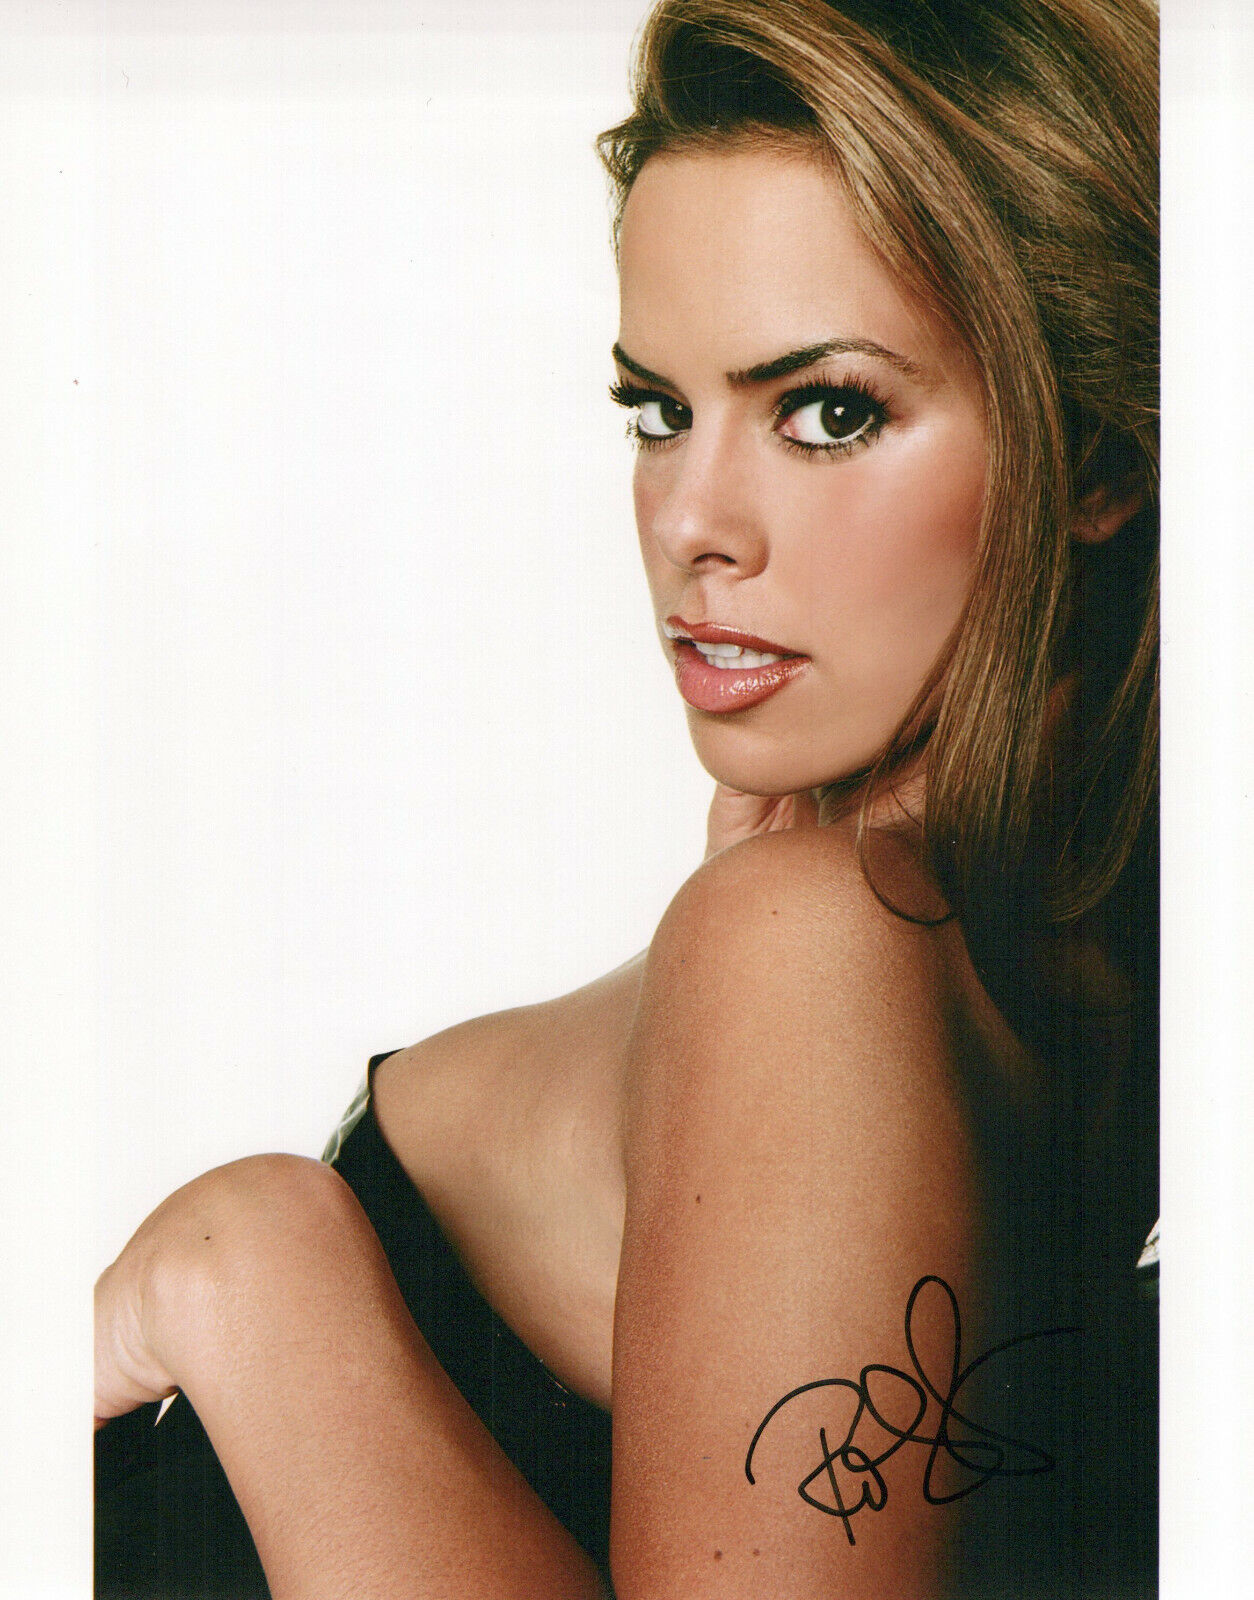 Rosa Blasi glamour shot autographed Photo Poster painting signed 8x10 #15